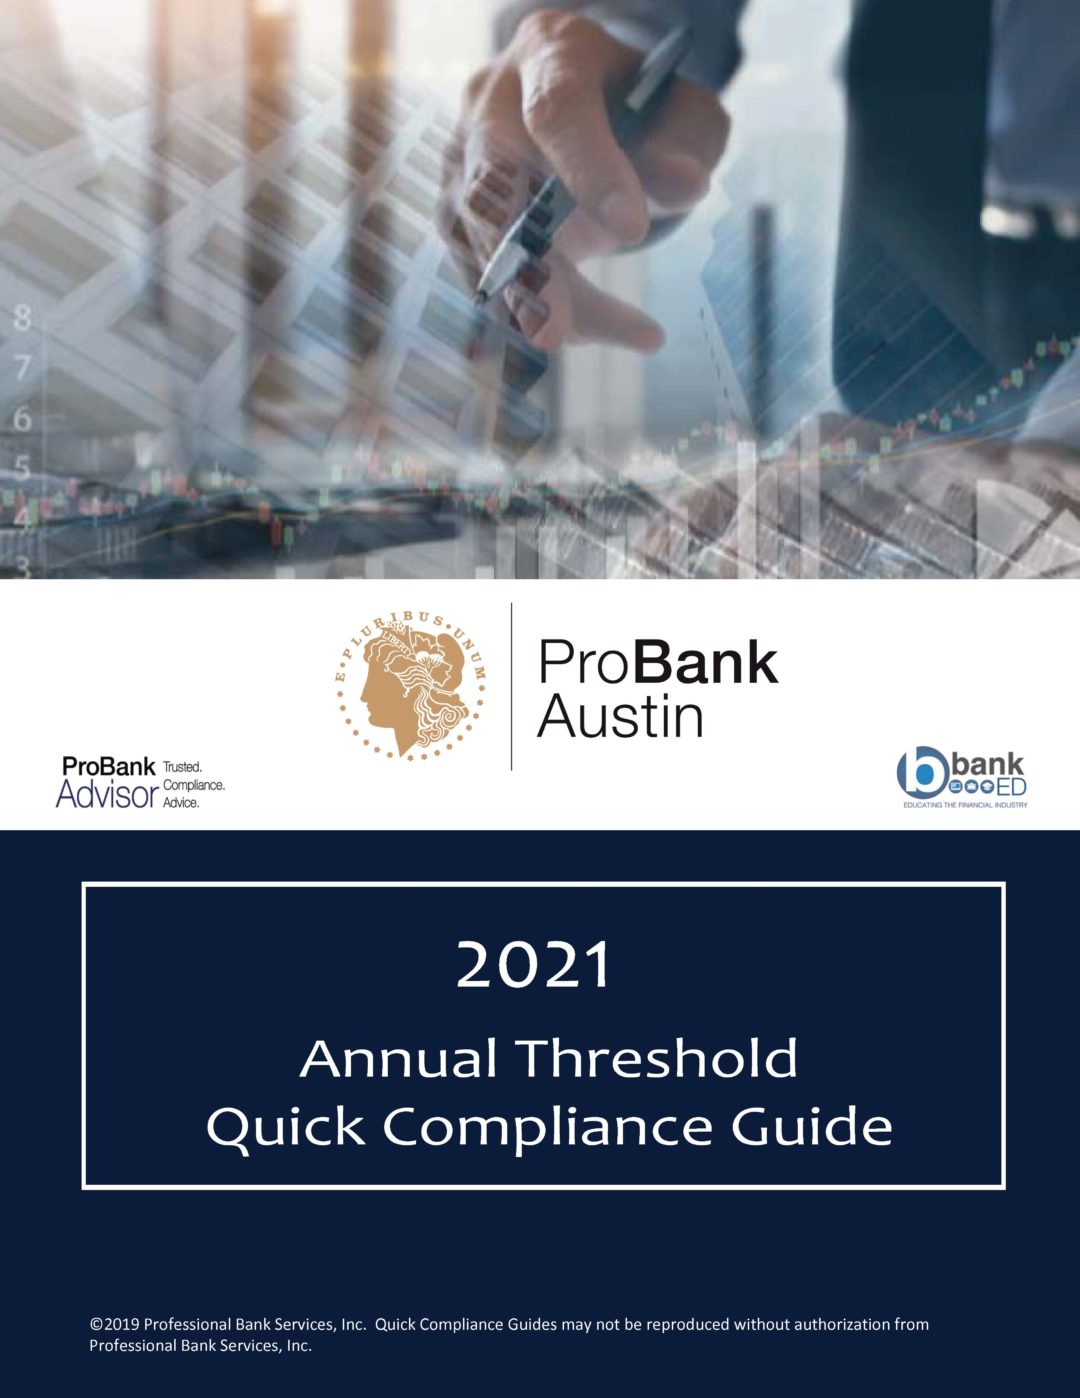 2021 Annual Threshold Quick Compliance Guide - ProBank Austin